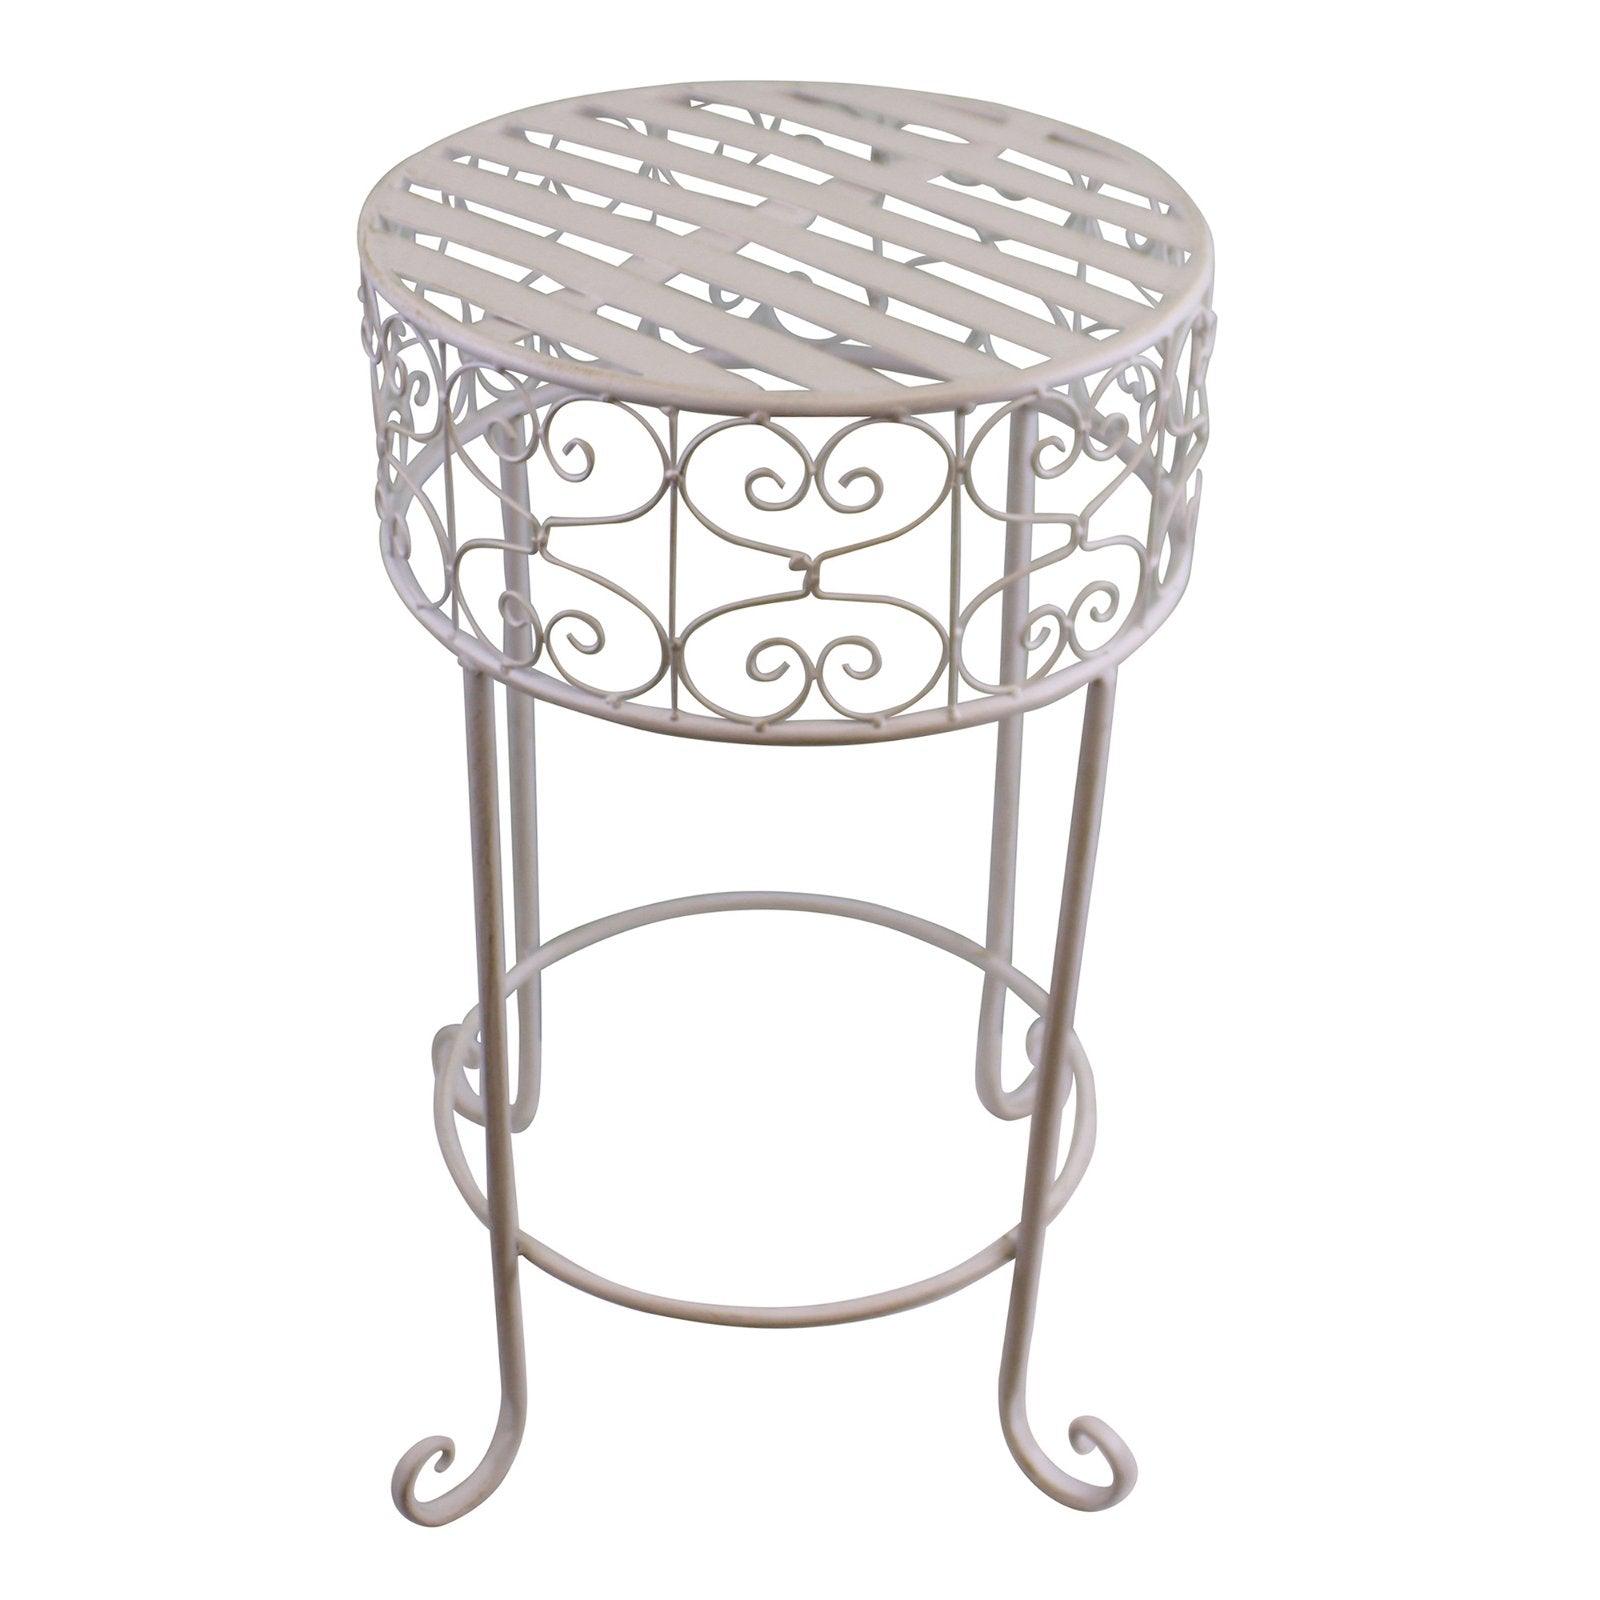 Cream Scroll Metal Plant Stand - £52.99 - Planters, Vases & Plant Stands 